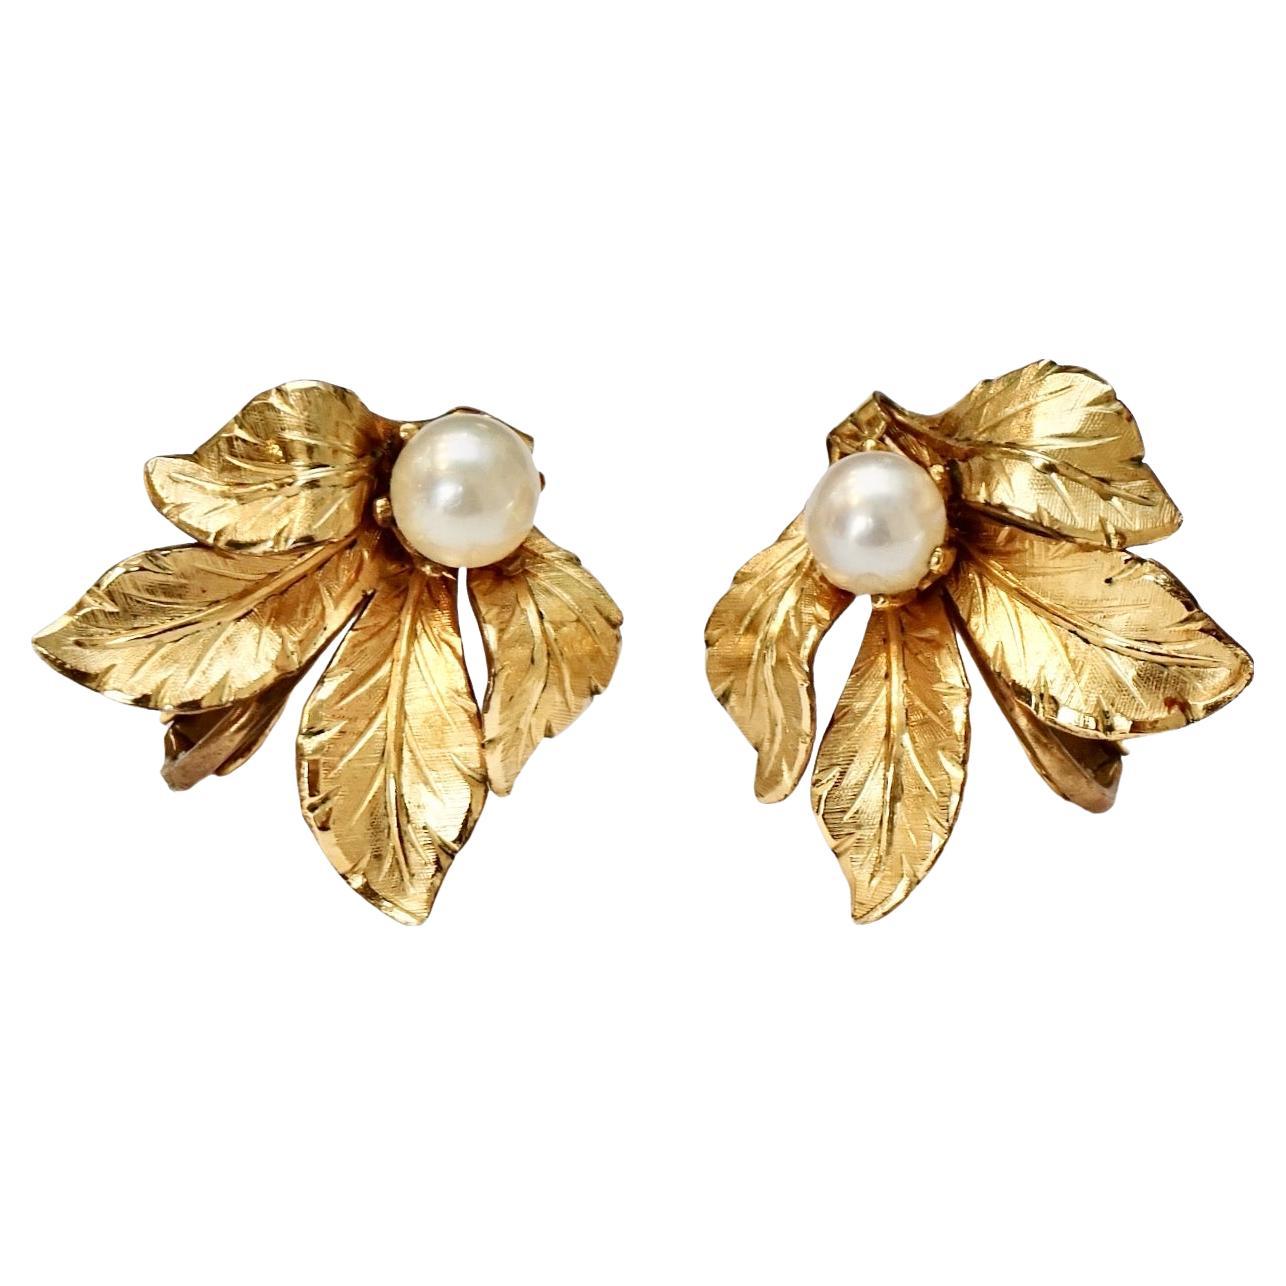 Creed Gold Filled Cultured Pearl and Leaf Screw Back Earrings